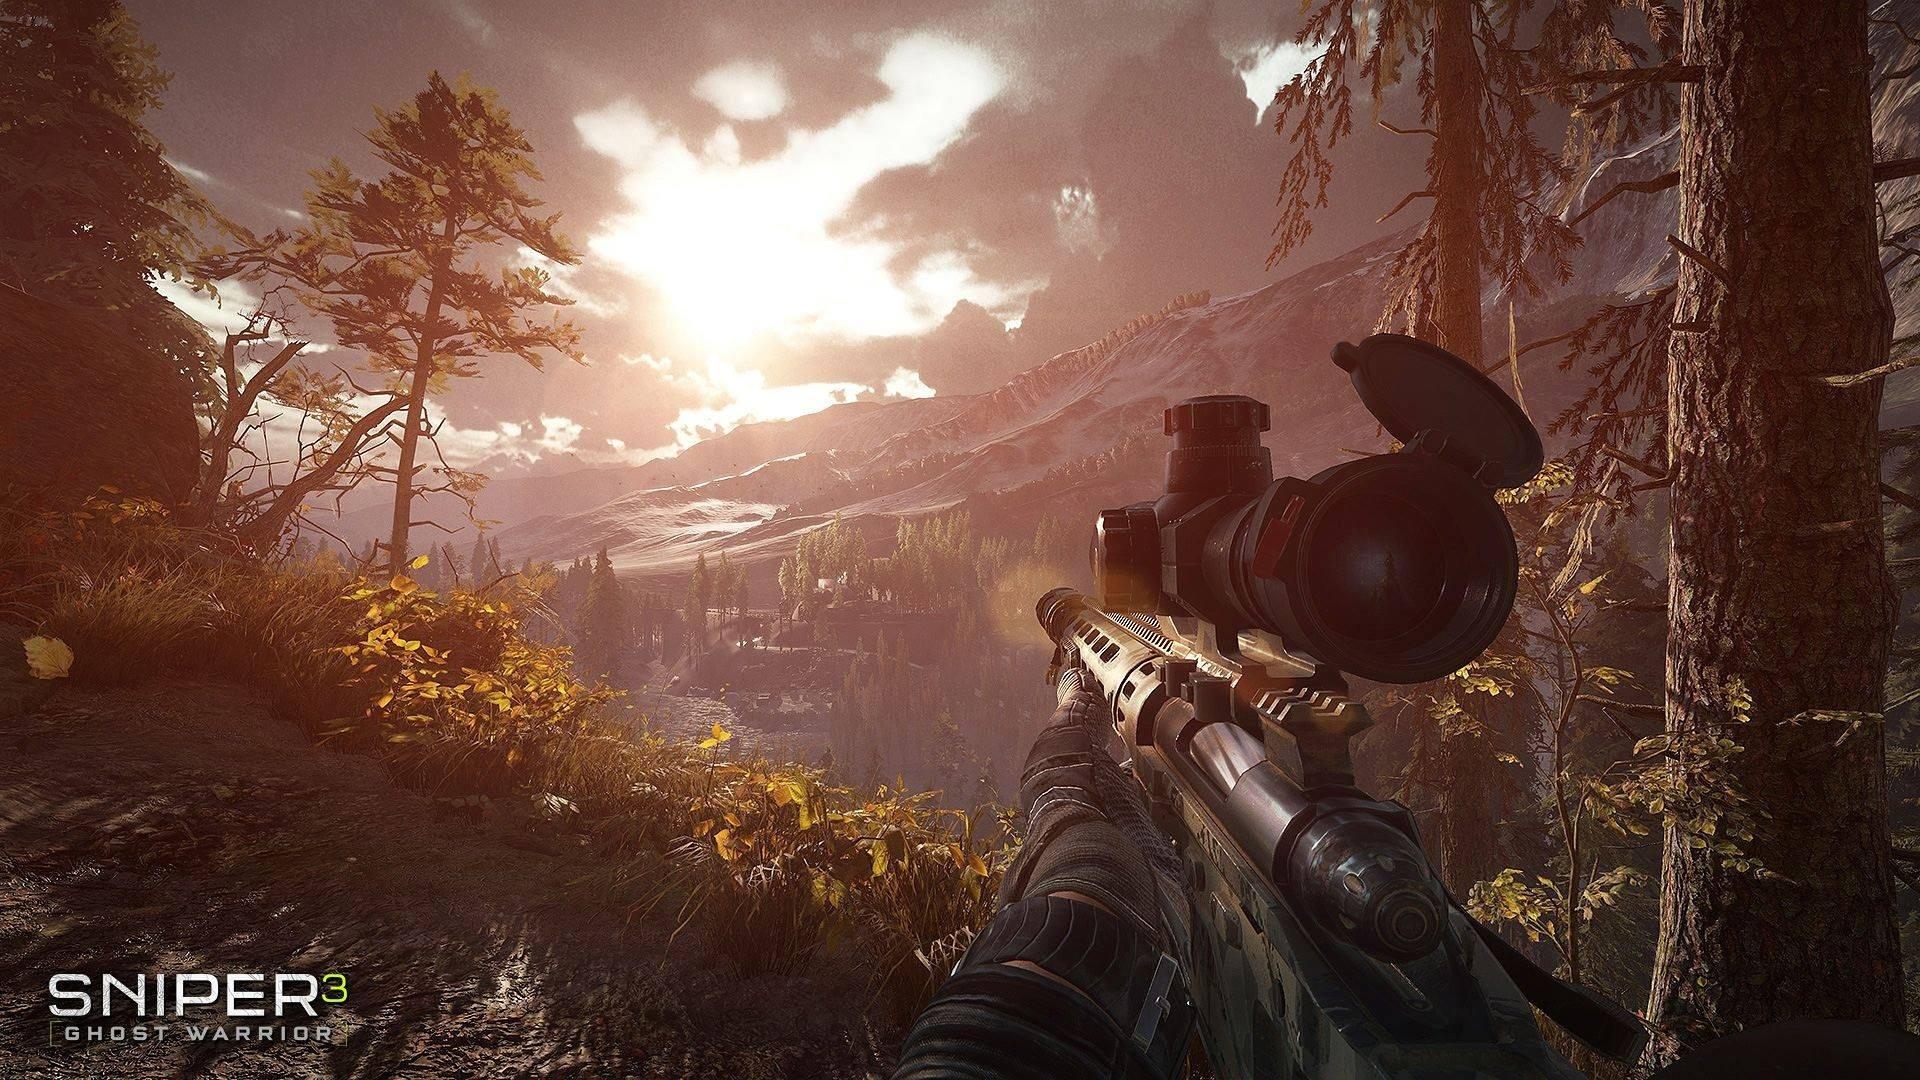 Sniper: Ghost Warrior 3 Has a 27 km² Game World, Will Last 35 Hours